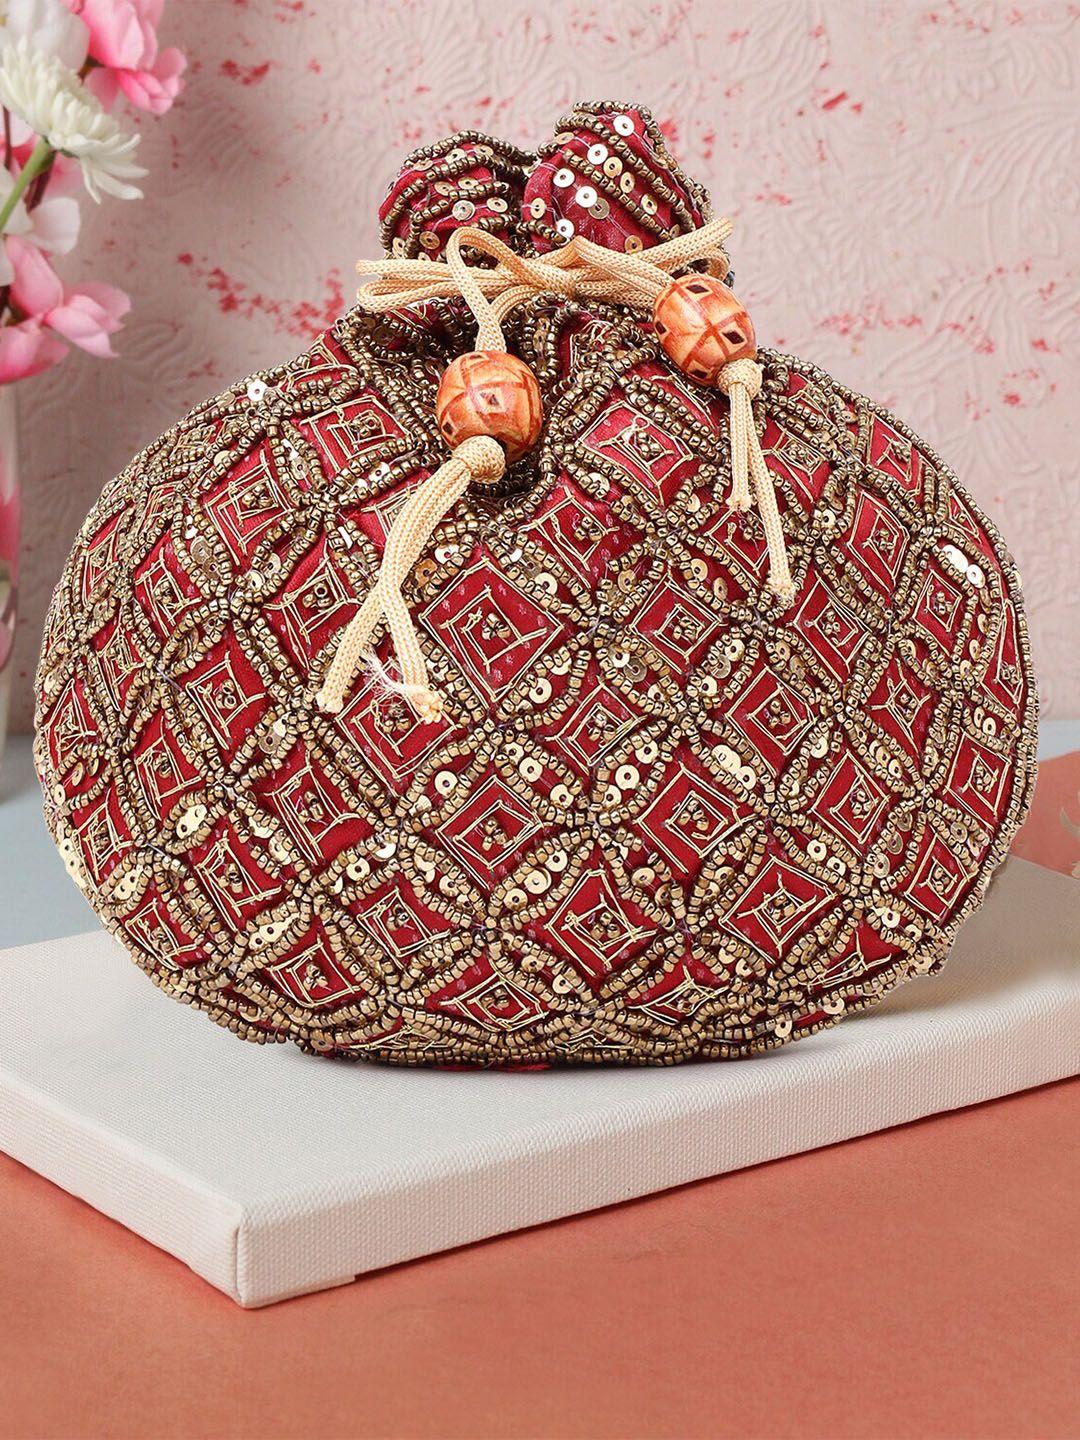 dn creation embroidered potli clutch